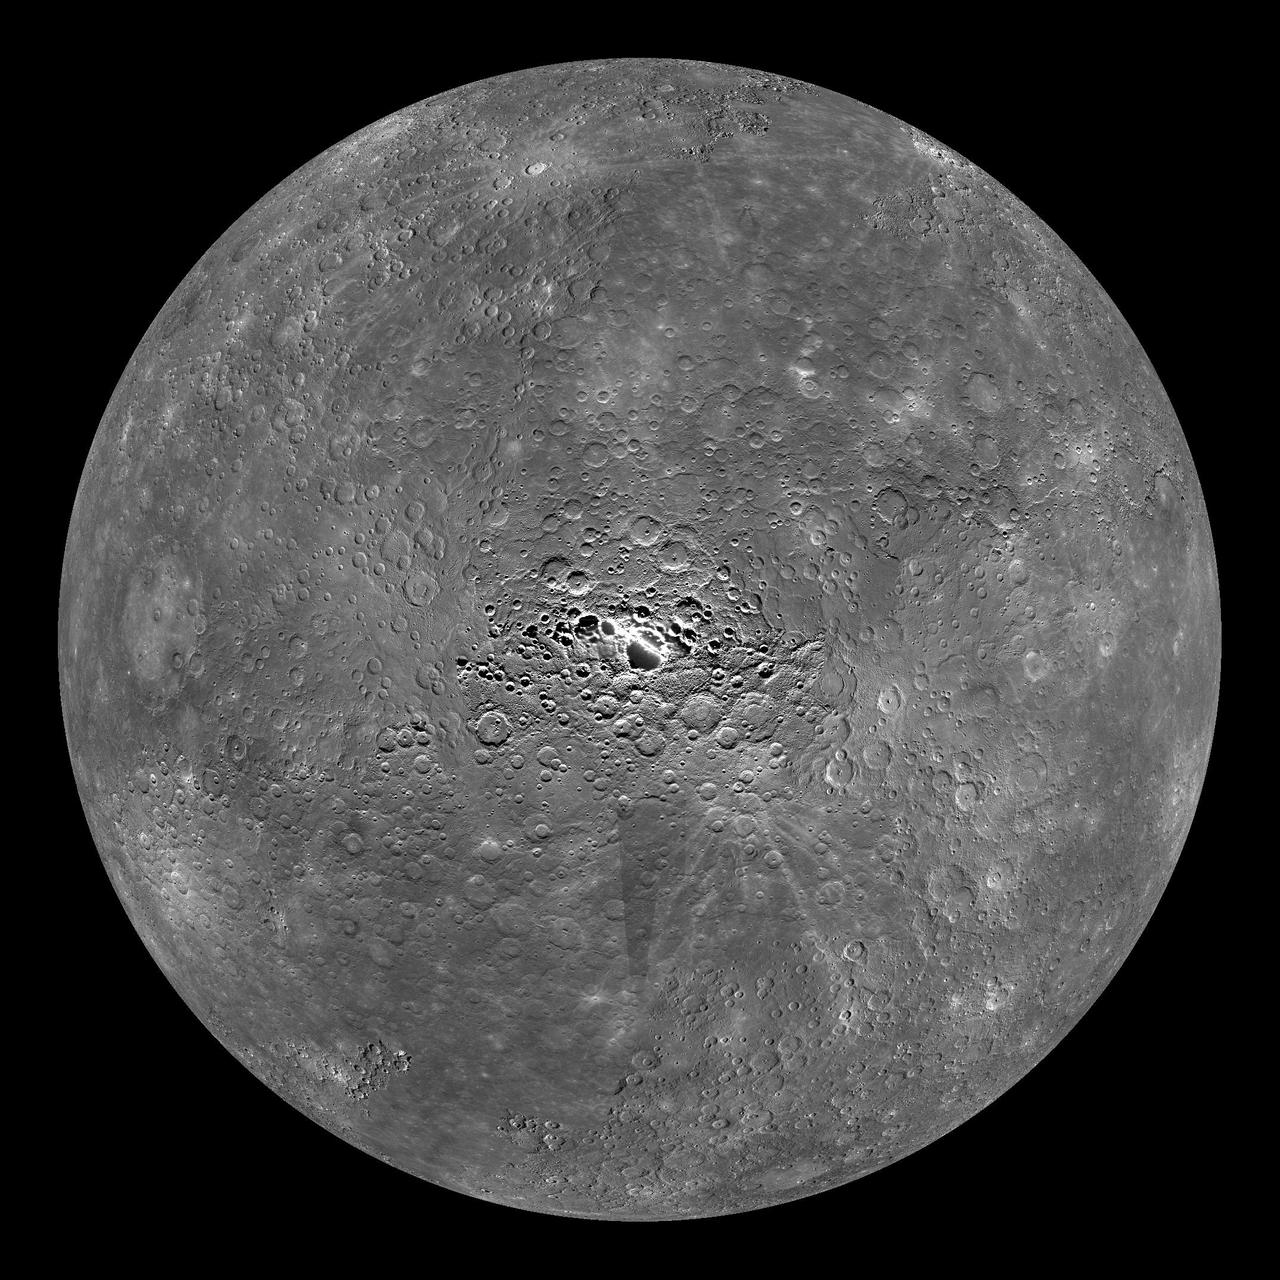 THE NORTHERN REGIONS OF THE PLANET MERCURY FROM SPACE